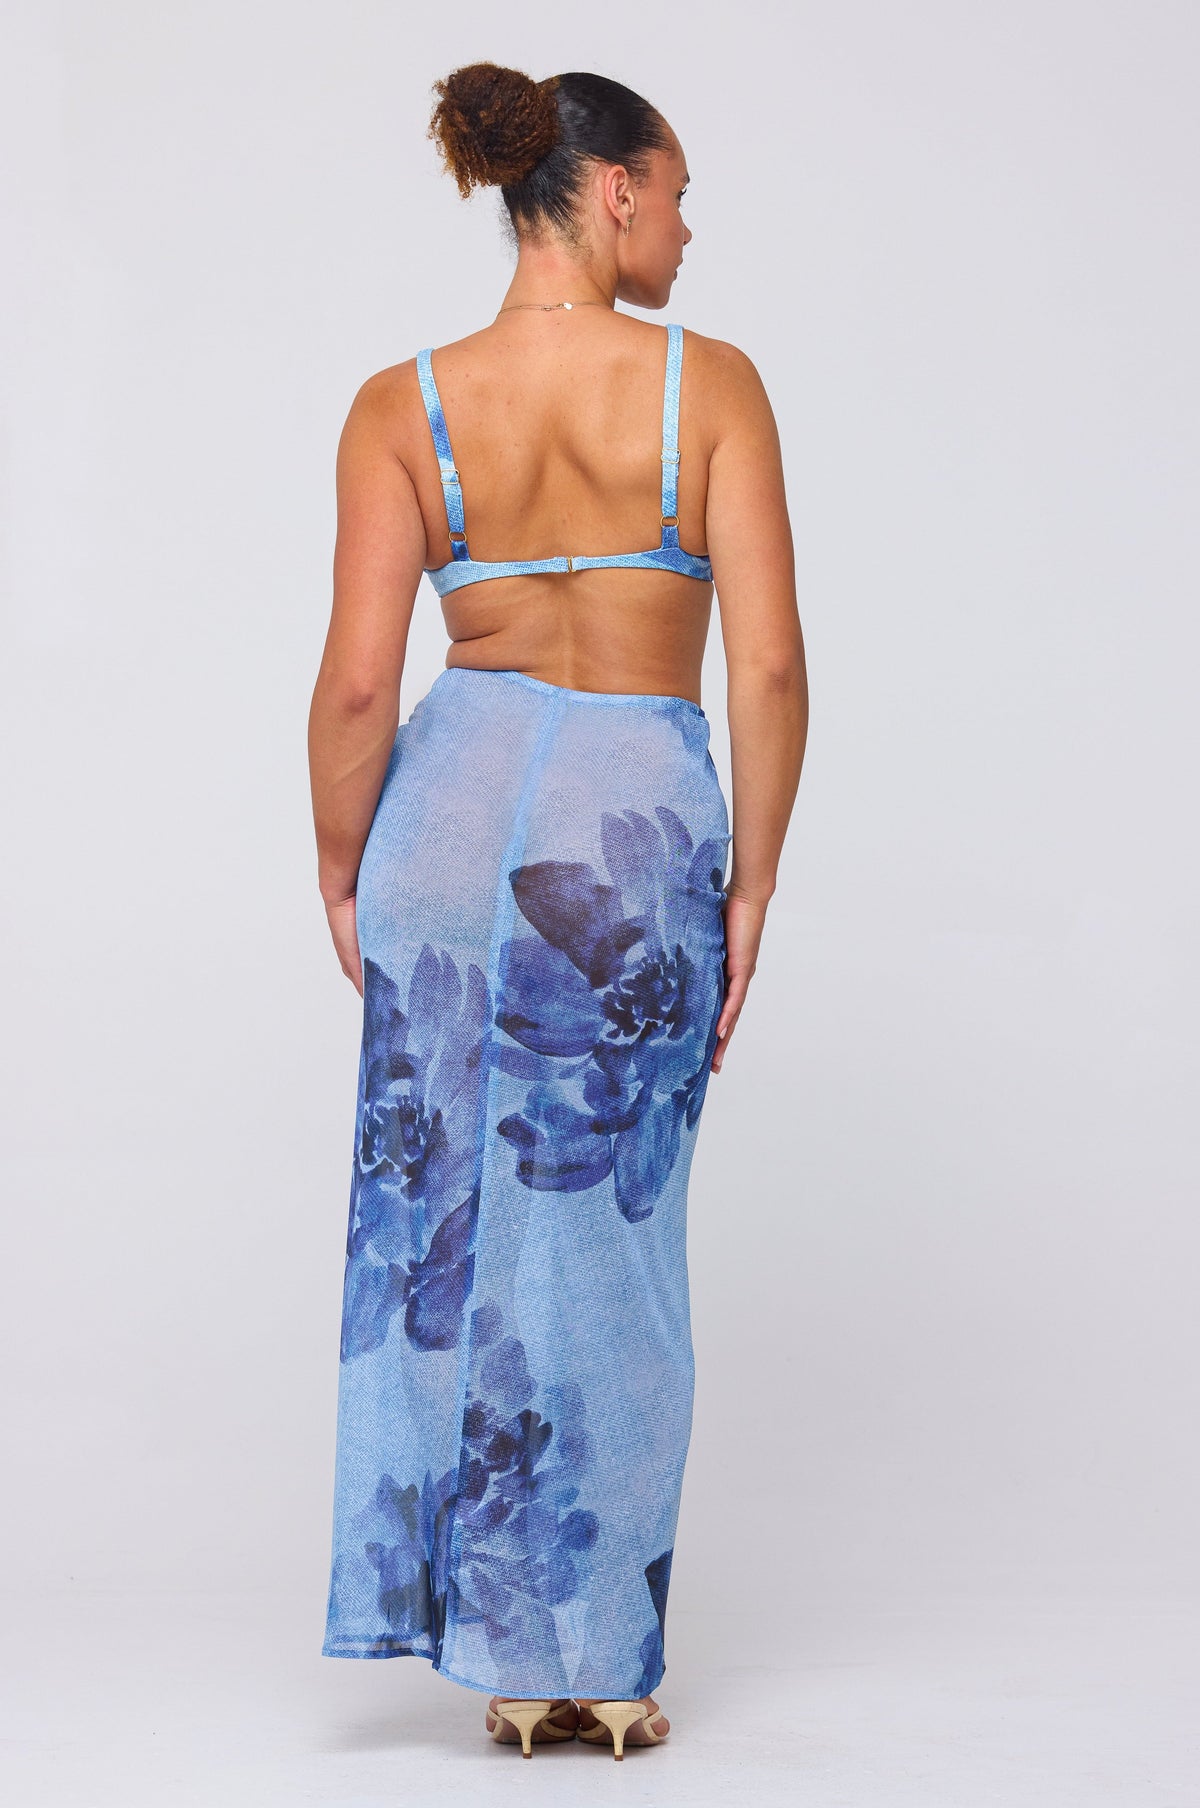 This is an image of Ziggy Mesh Skirt in Indigo - RESA featuring a model wearing the dress